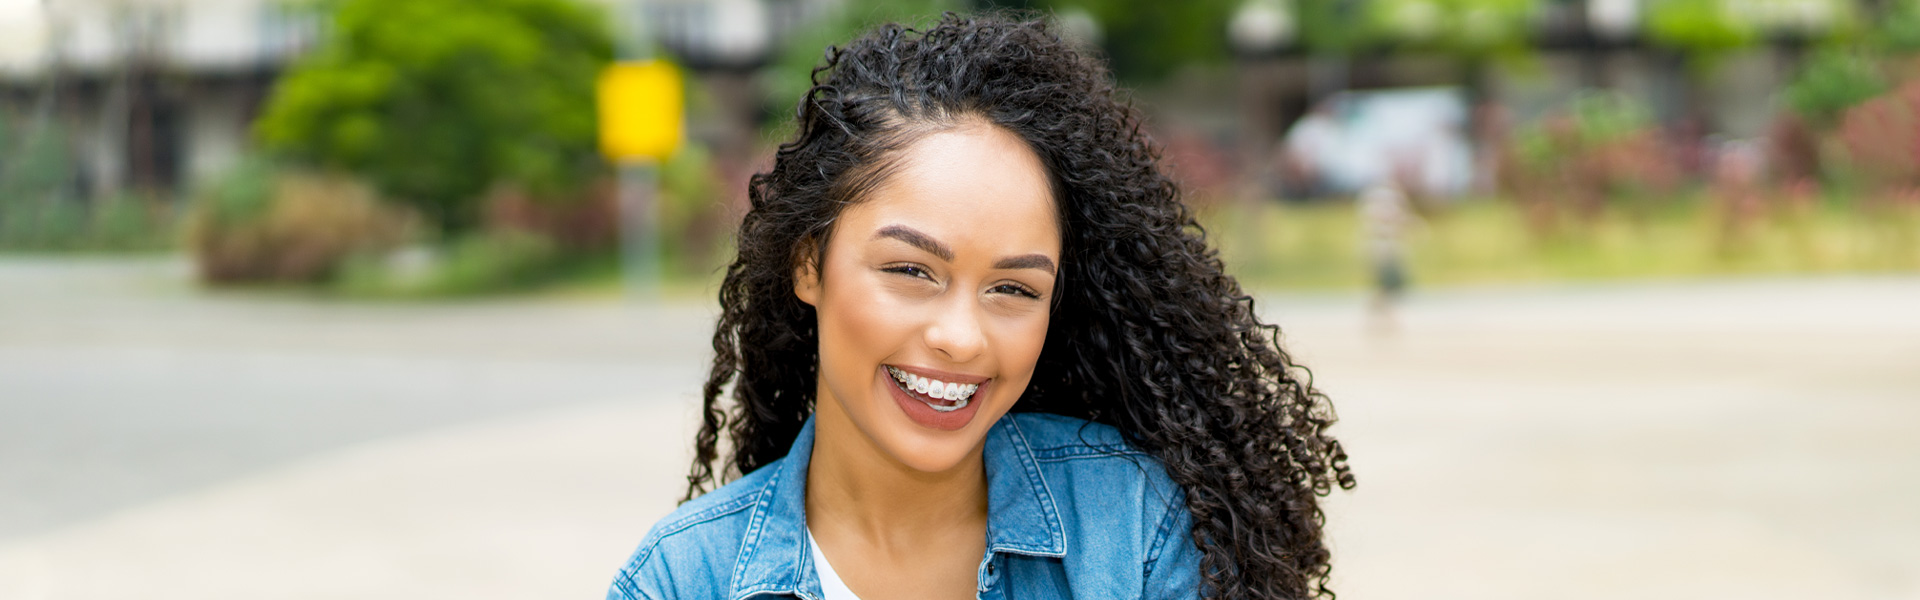 Need Affordable Adult Braces? Here’s Everything You Need to Know